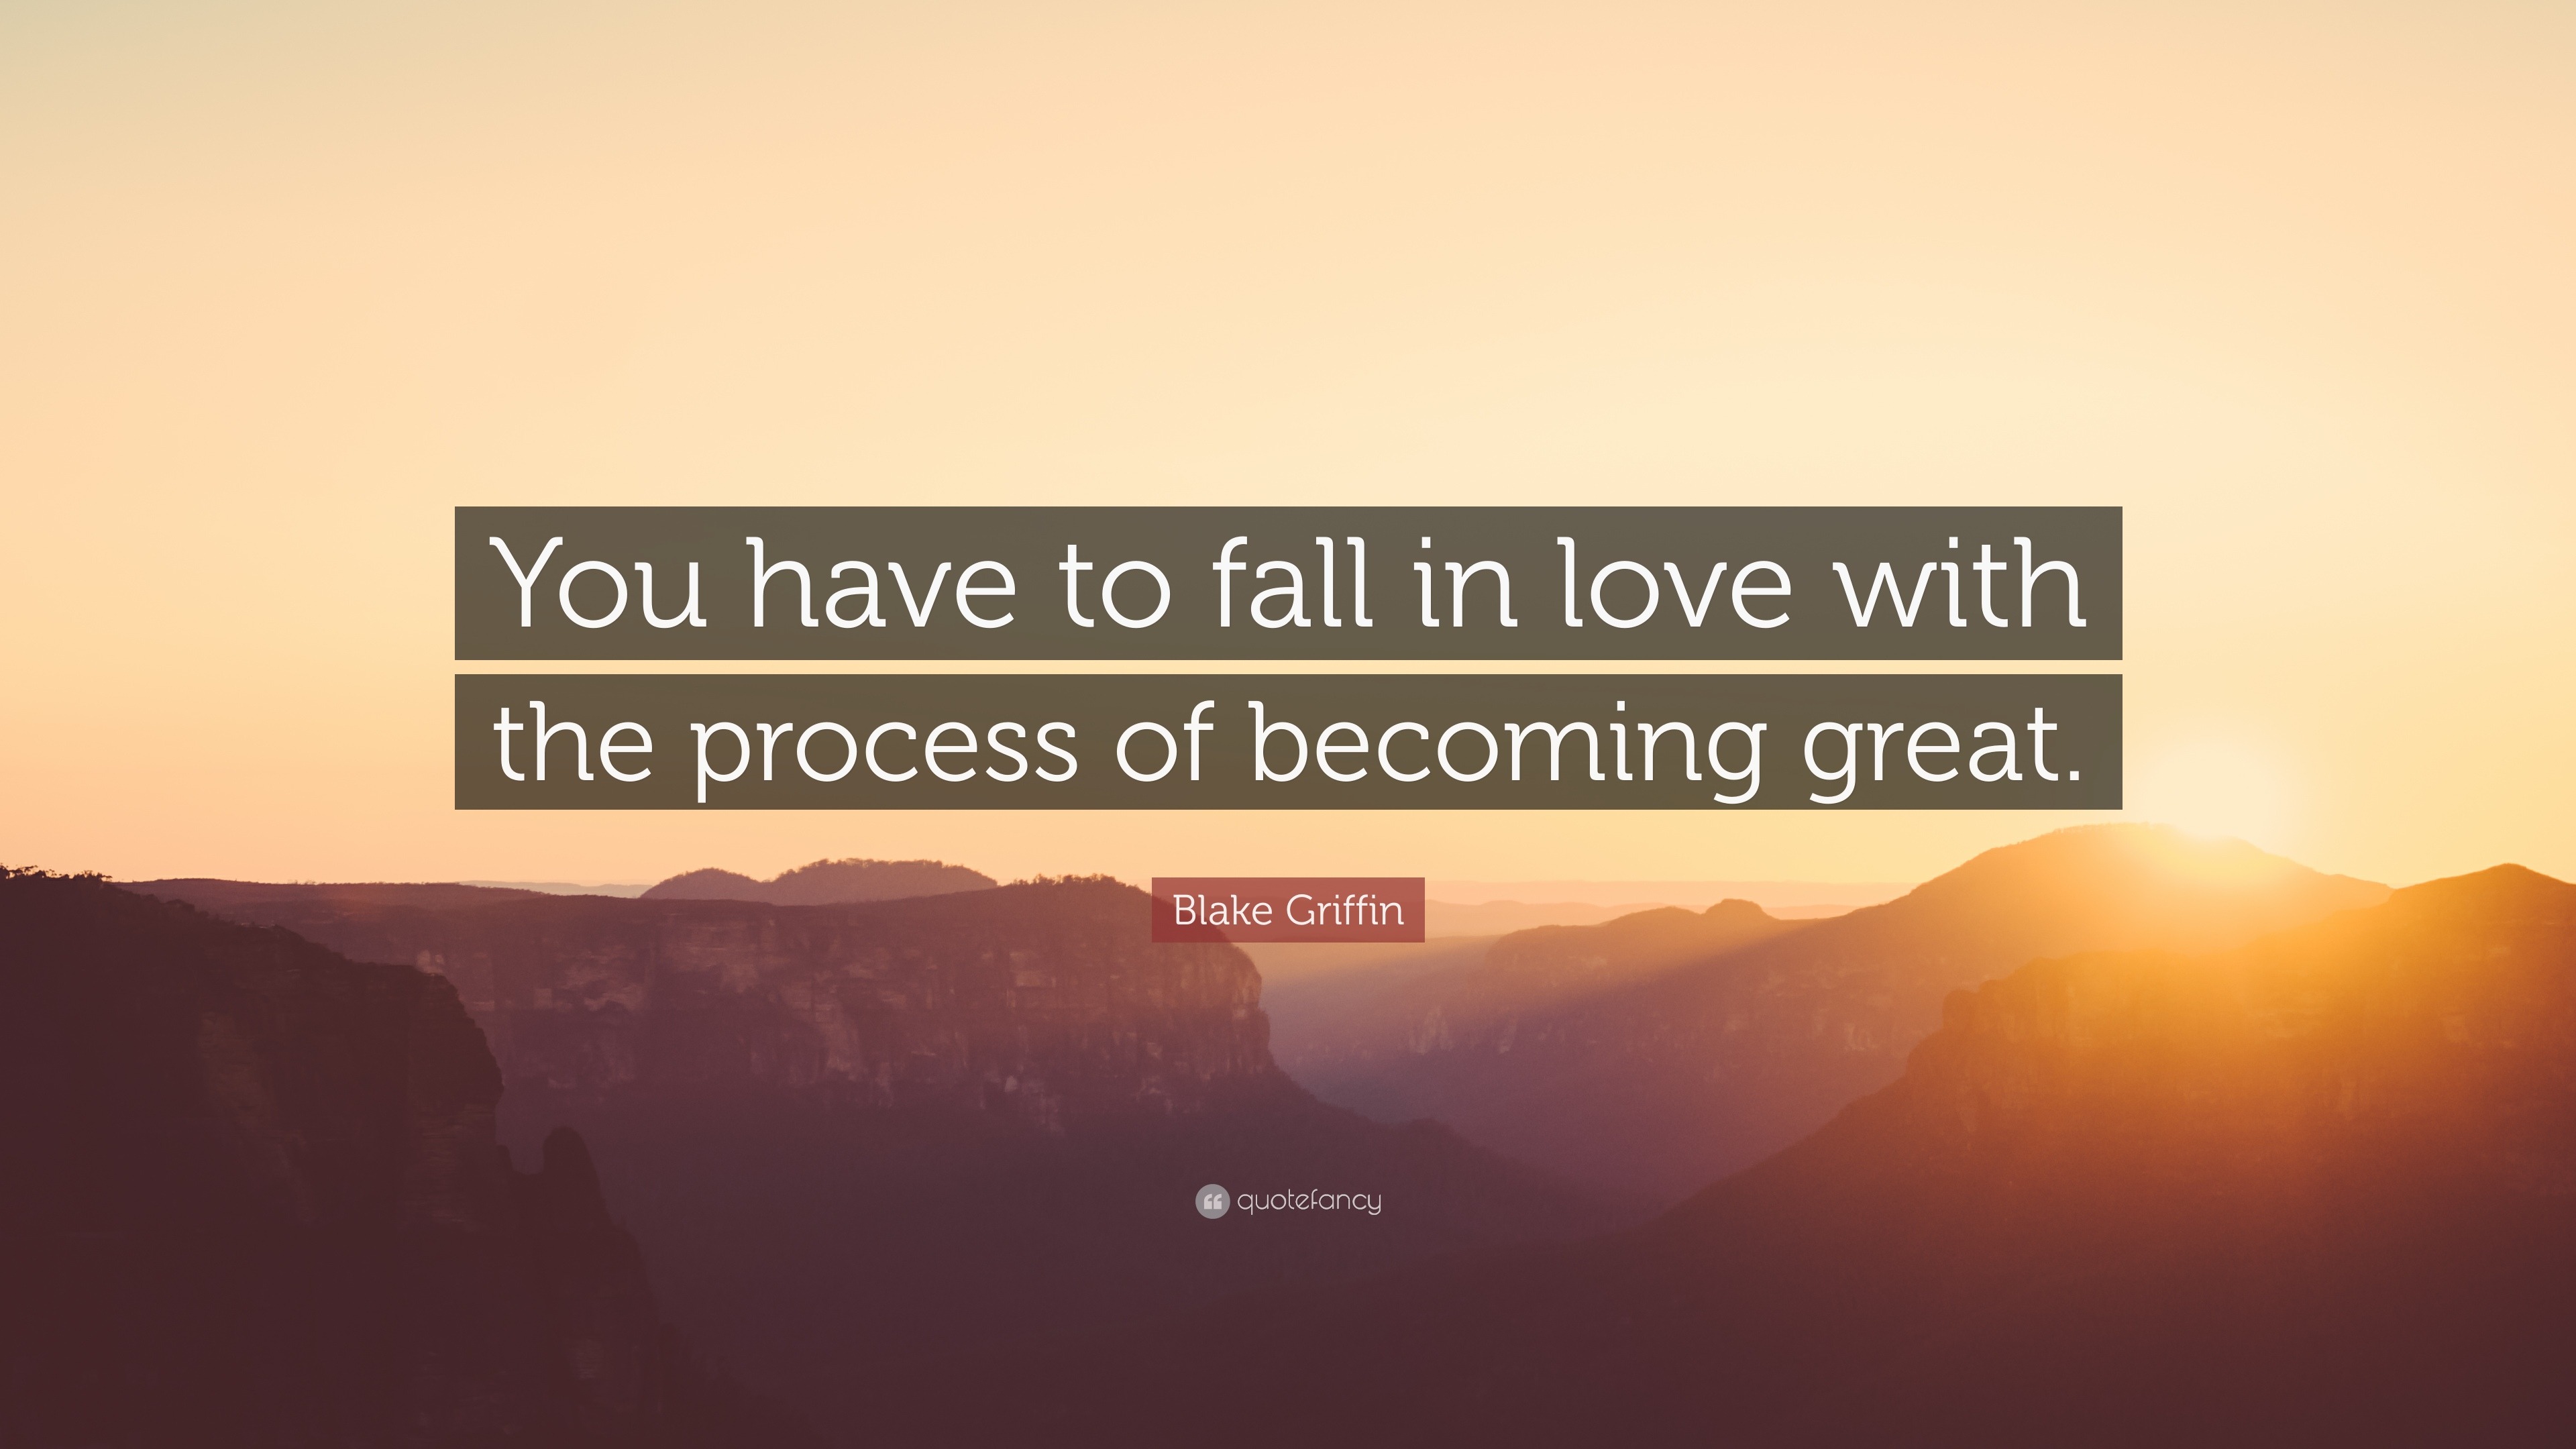 Blake Griffin Quote You Have To Fall In Love With The Process Of Becoming Great